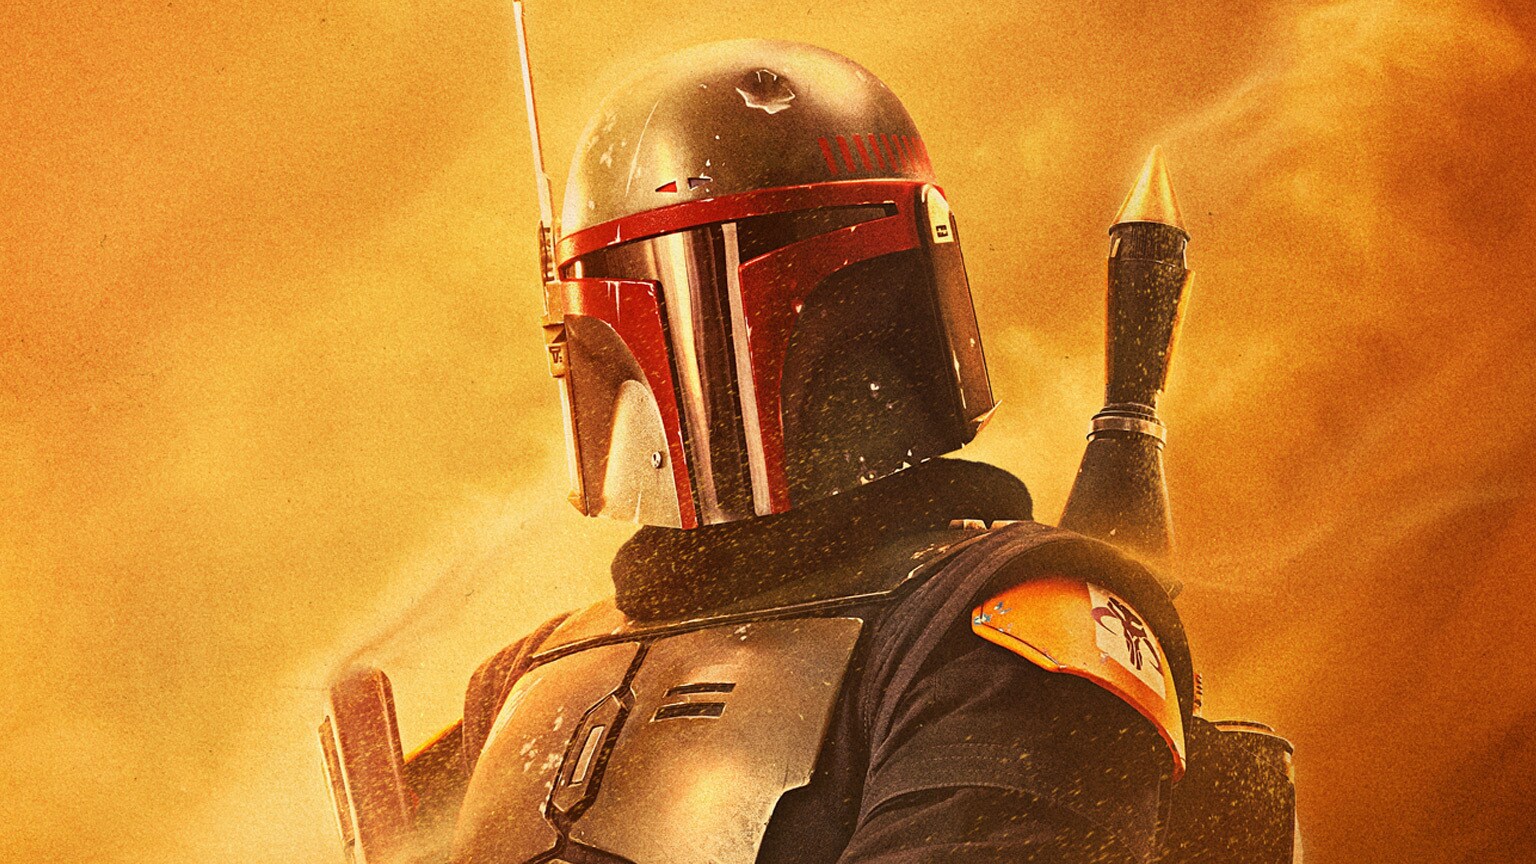 Get Ready for the Premiere of The Book of Boba Fett with New Character Posters!